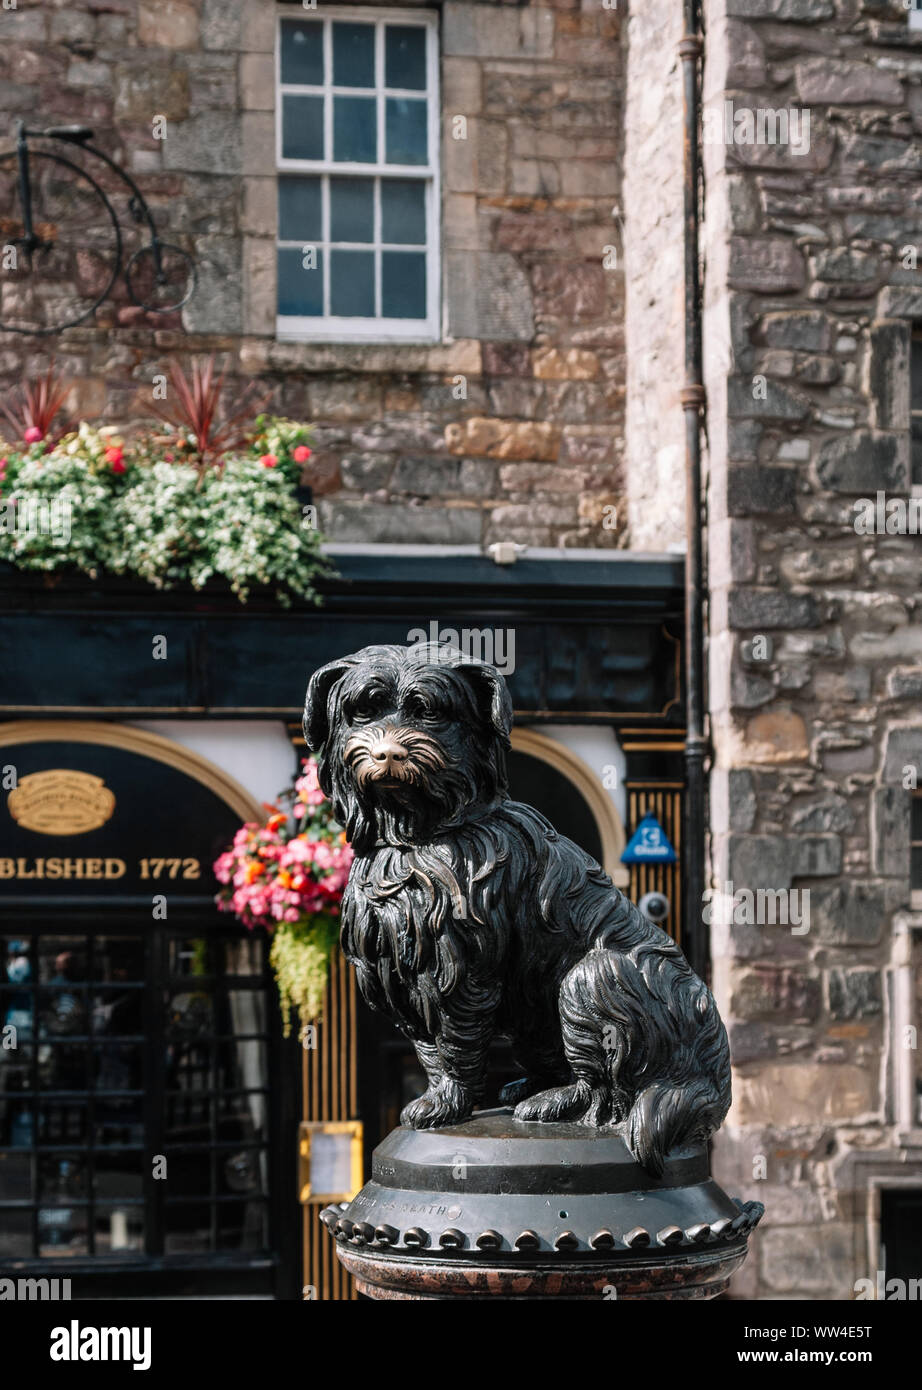 Statue of the famous loyal Skye Terrier dog Greyfriars Bobby and pub of the same name in Edinburgh old town. Stock Photo